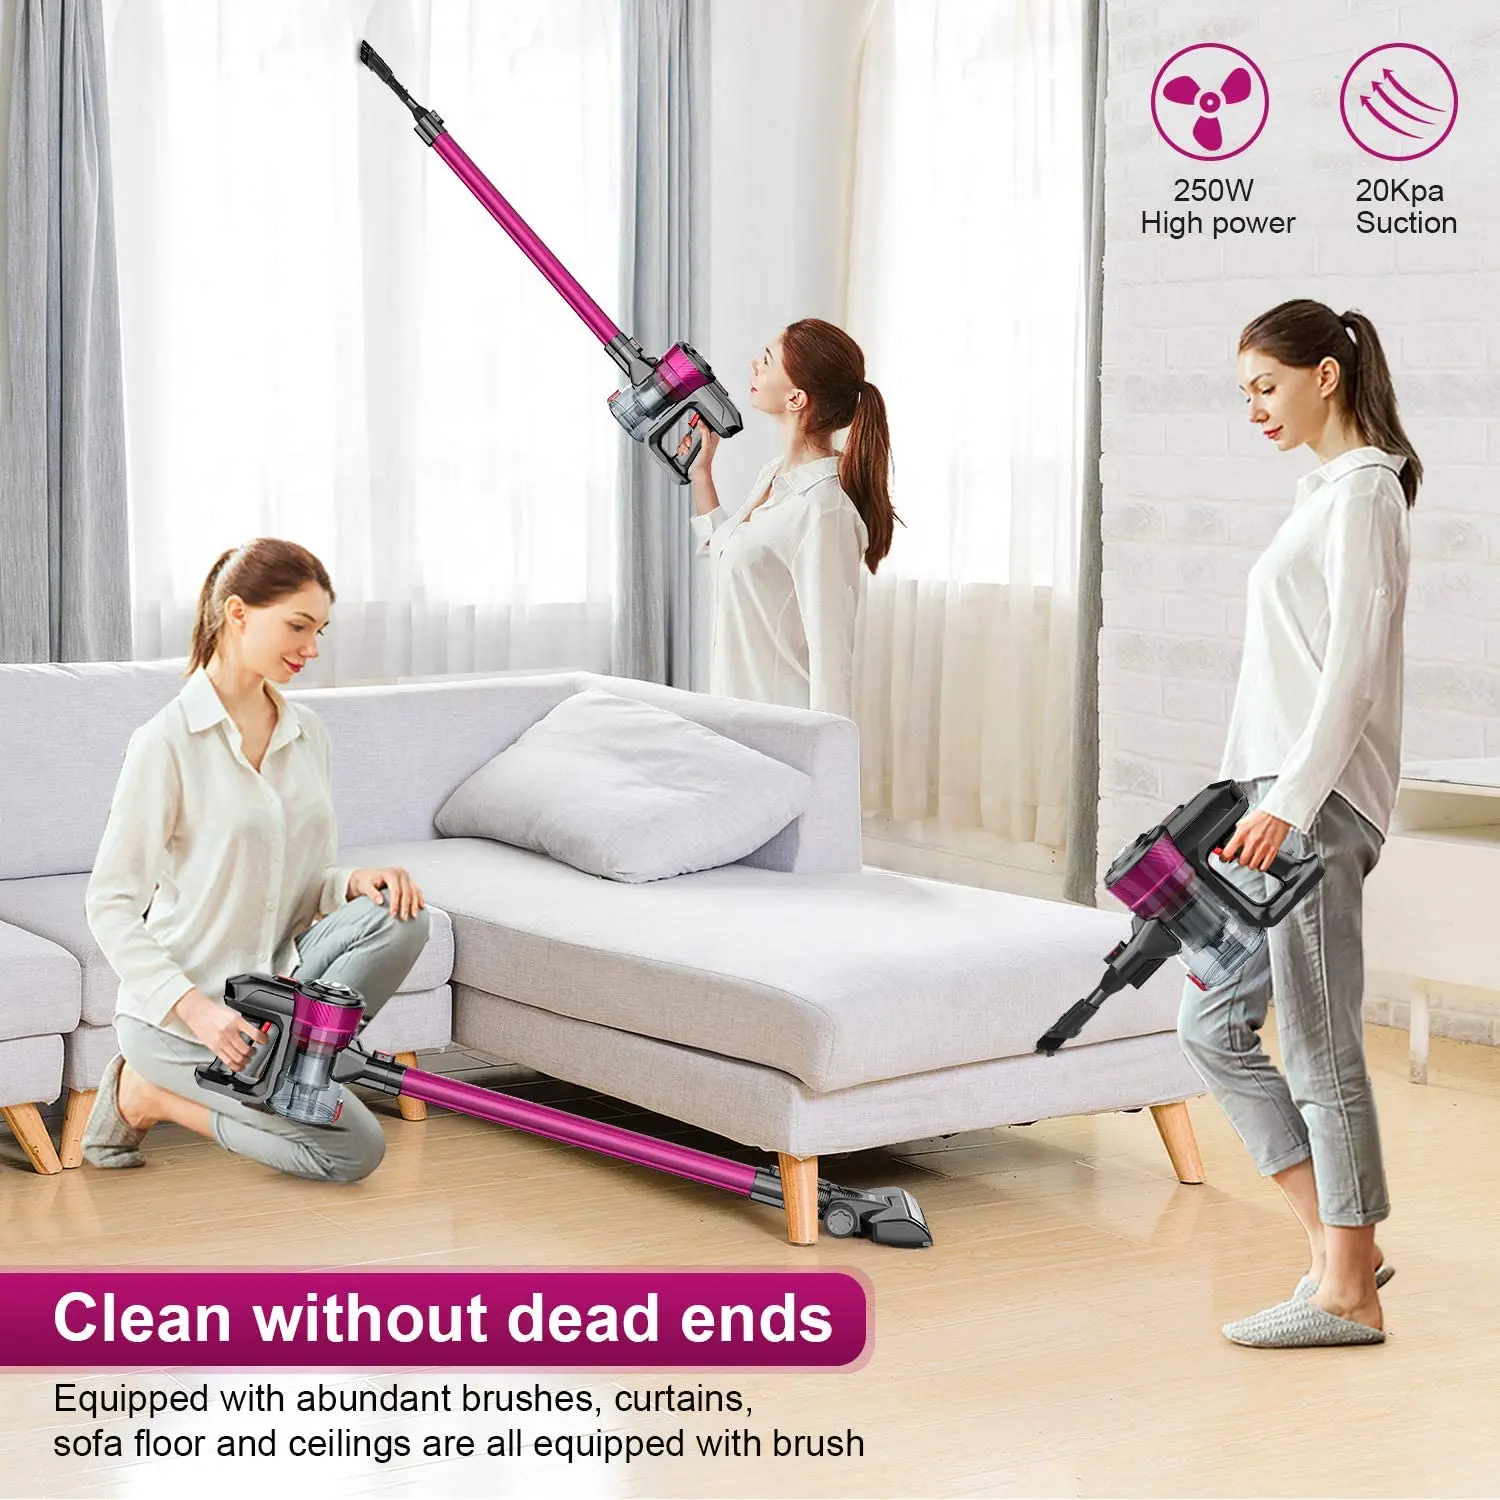 ONSON D18Epro Vacuum Cleaner Cordless Vacuum 20kPa Strong Suction 2-1 Stick 250W 